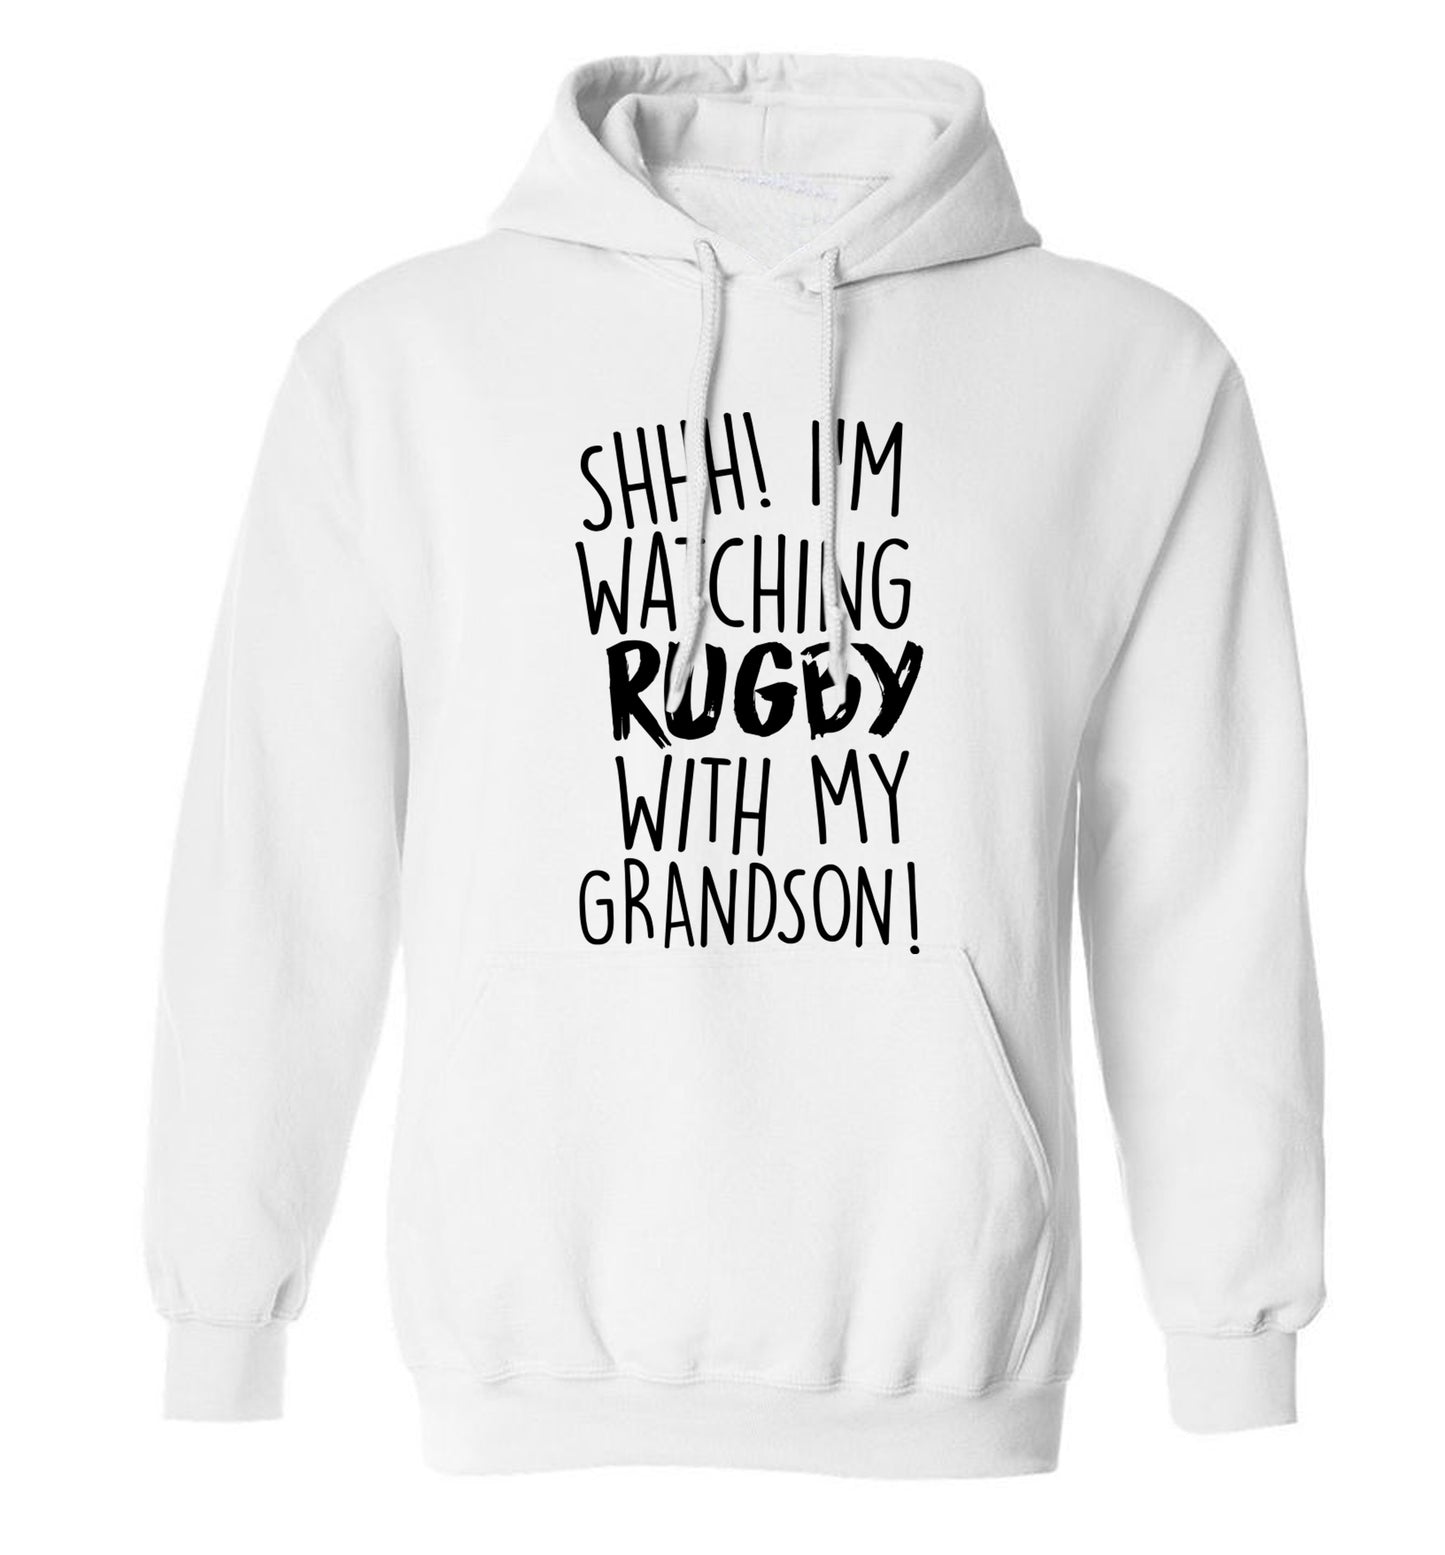 Shh I'm watching rugby with my grandson adults unisex white hoodie 2XL